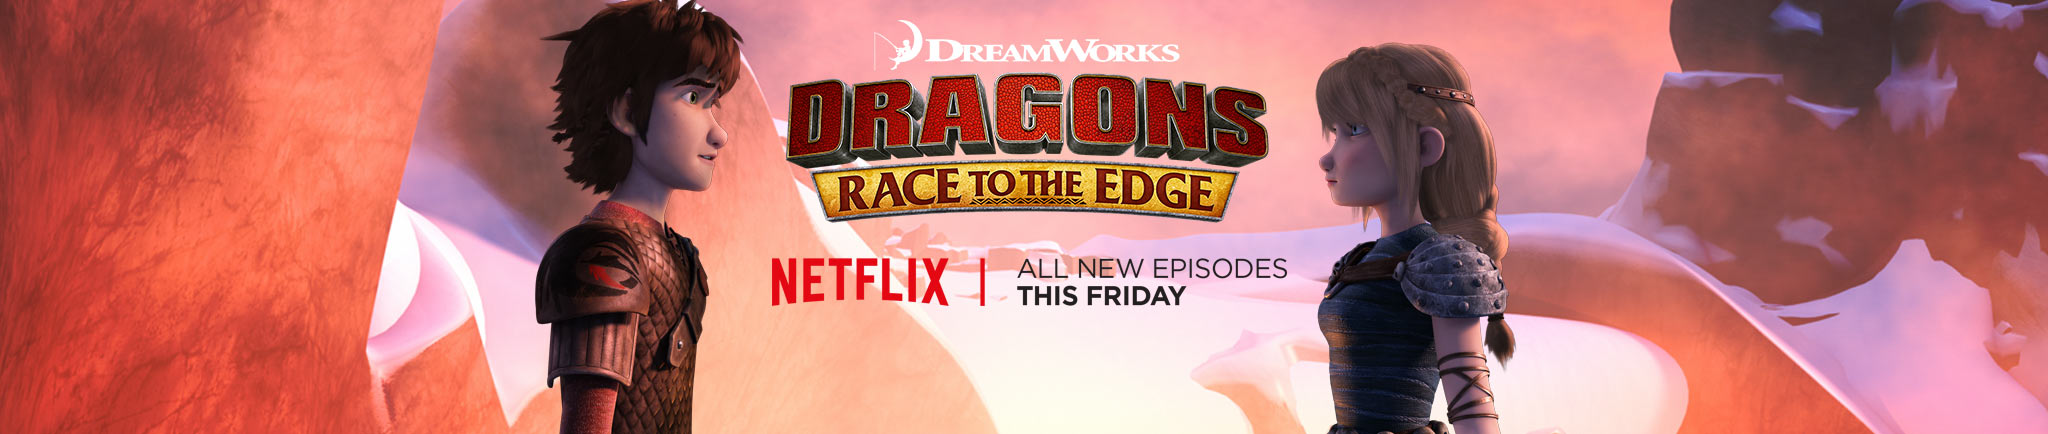 Dragons: Race to the Edge Season 4 Trailer and Clips #DreamWorksDragons 4